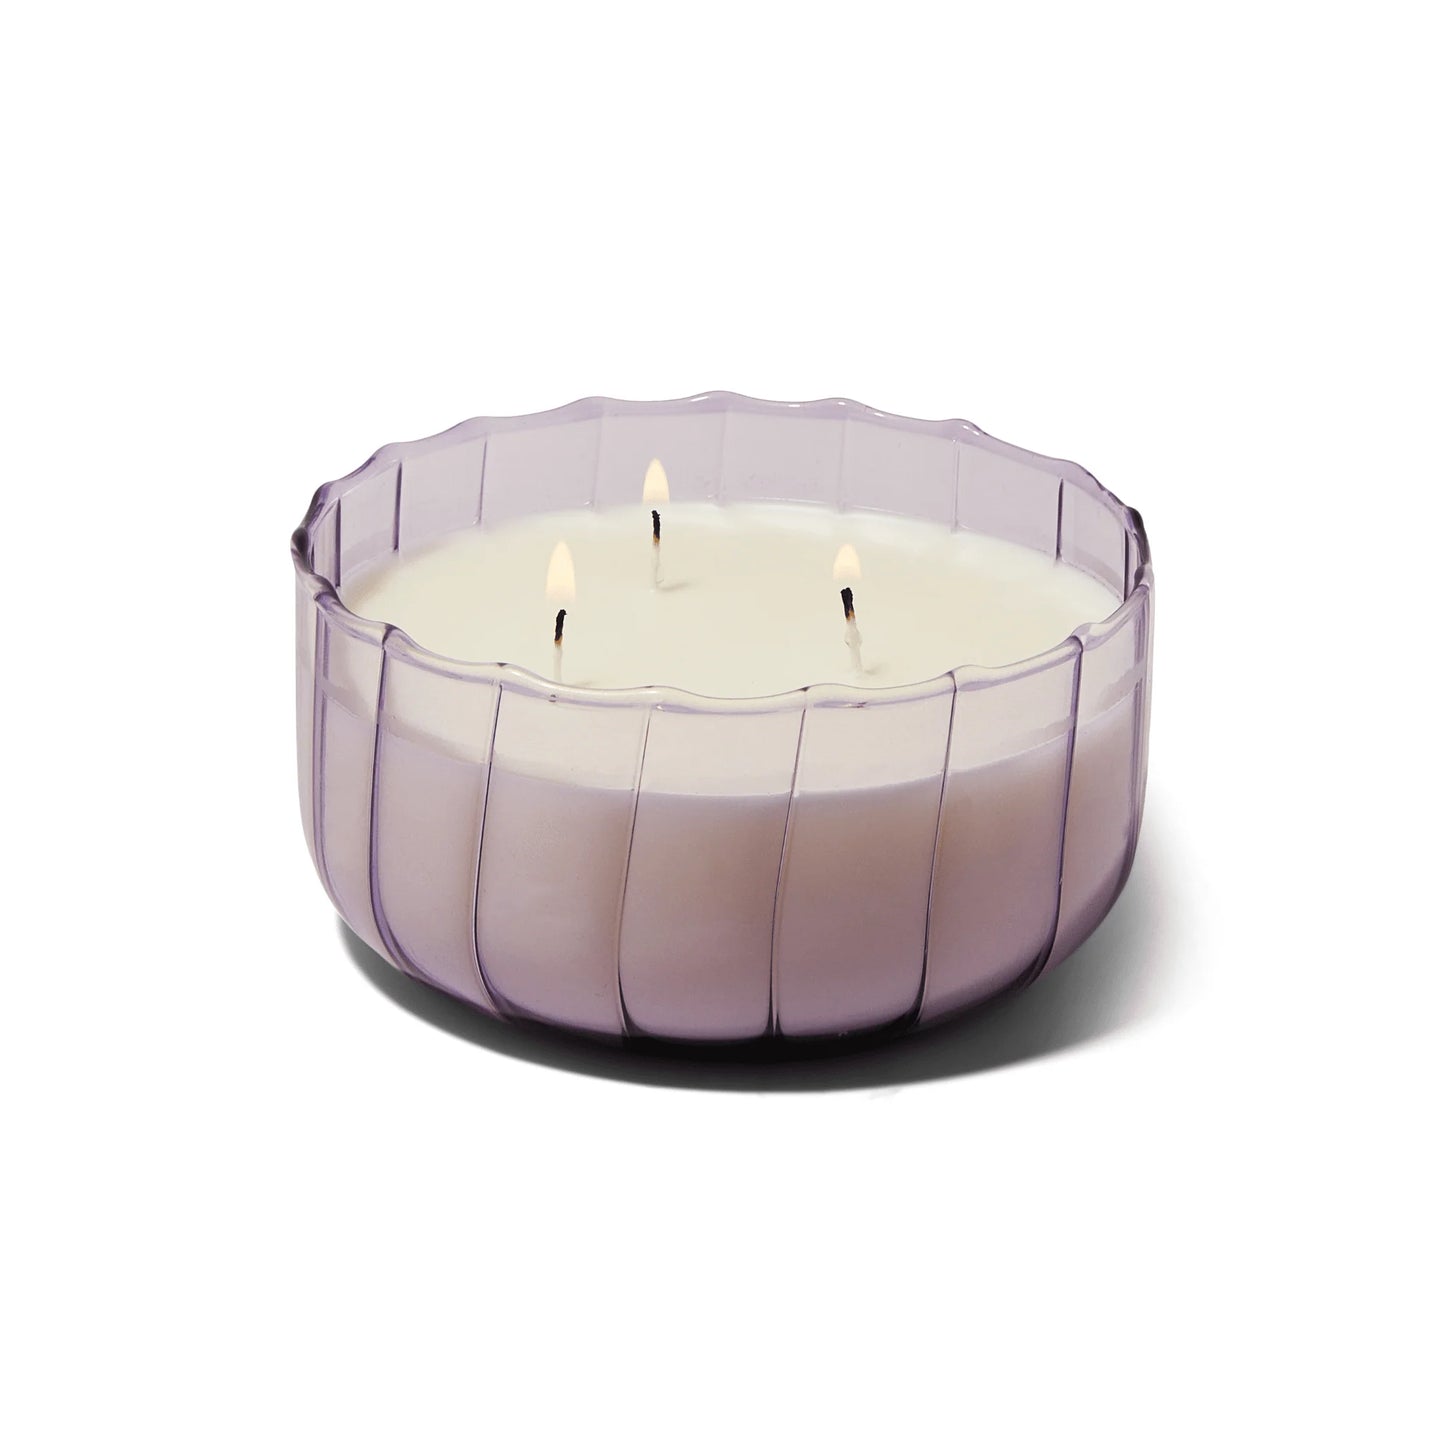 Ripple Collection Salted Iris Candle